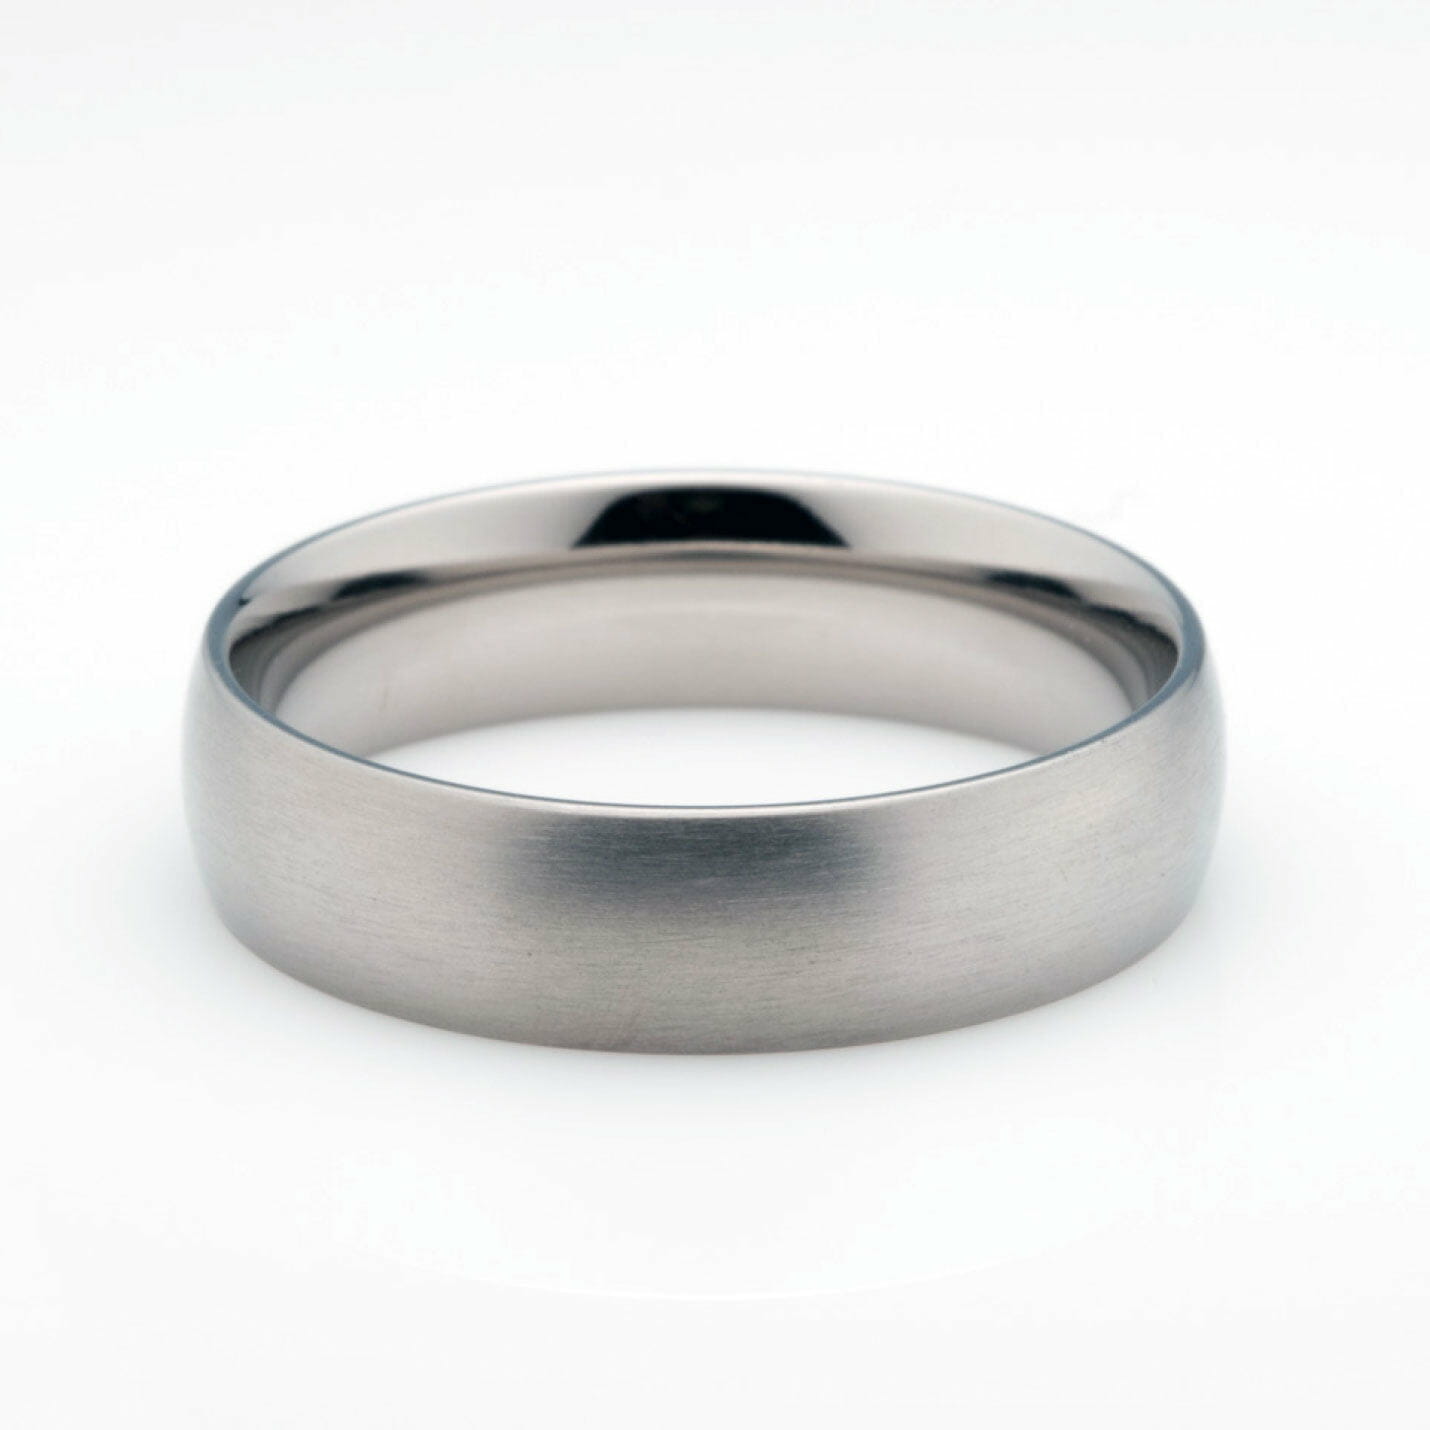 Free ring resize (just pay shipping & handling) - The Gentlemans Smith